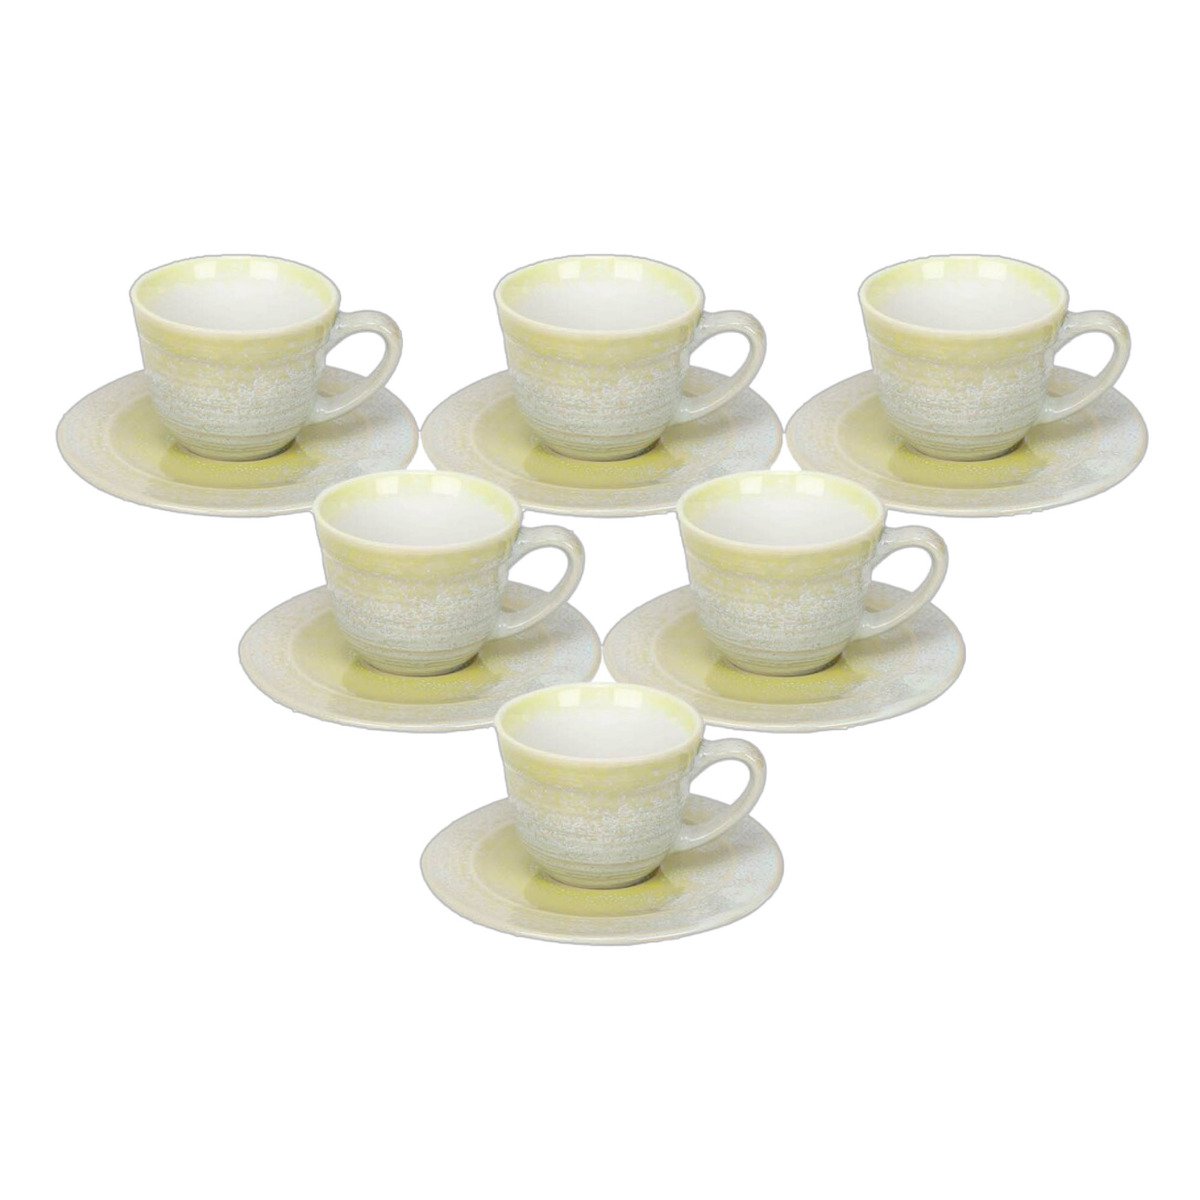 Tom Smith Cup Saucer 220ml 12s 362